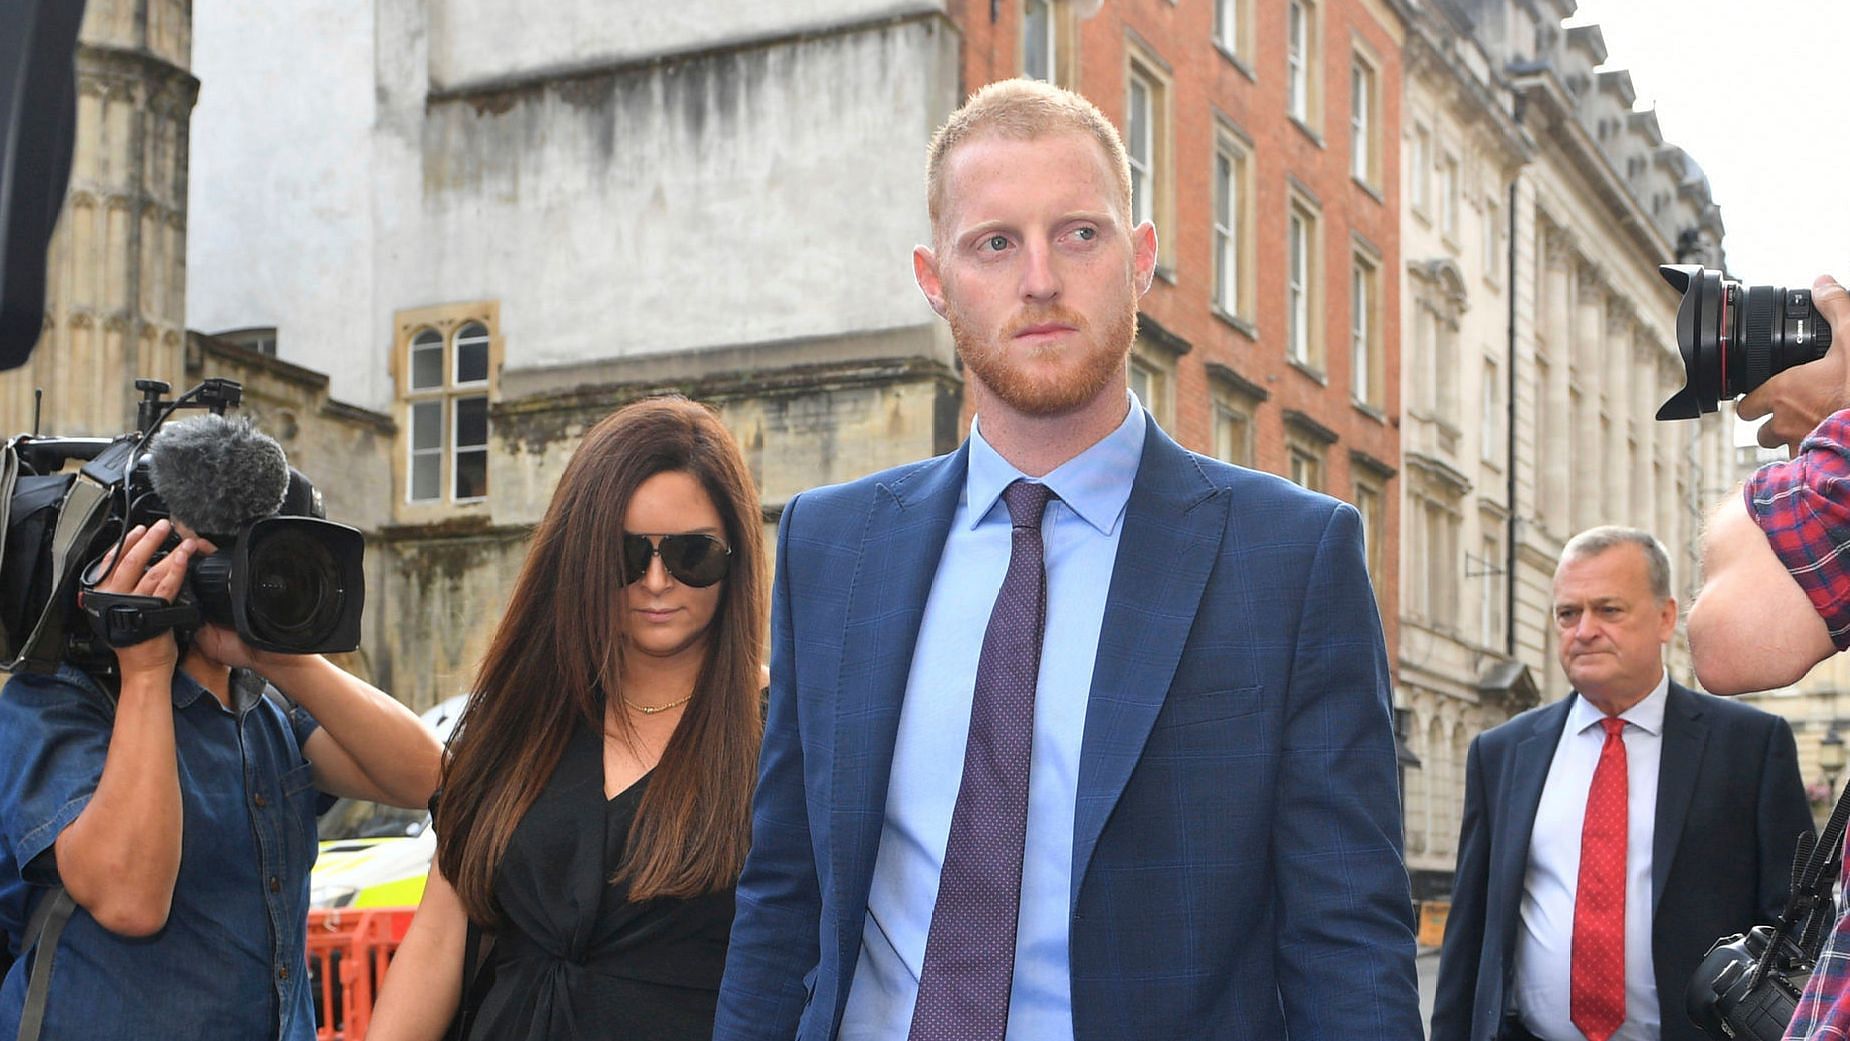 Ben Stokes’ wife Clare rubbished reports that he tried to “choke” her during a party, terming it as “non-sense”.